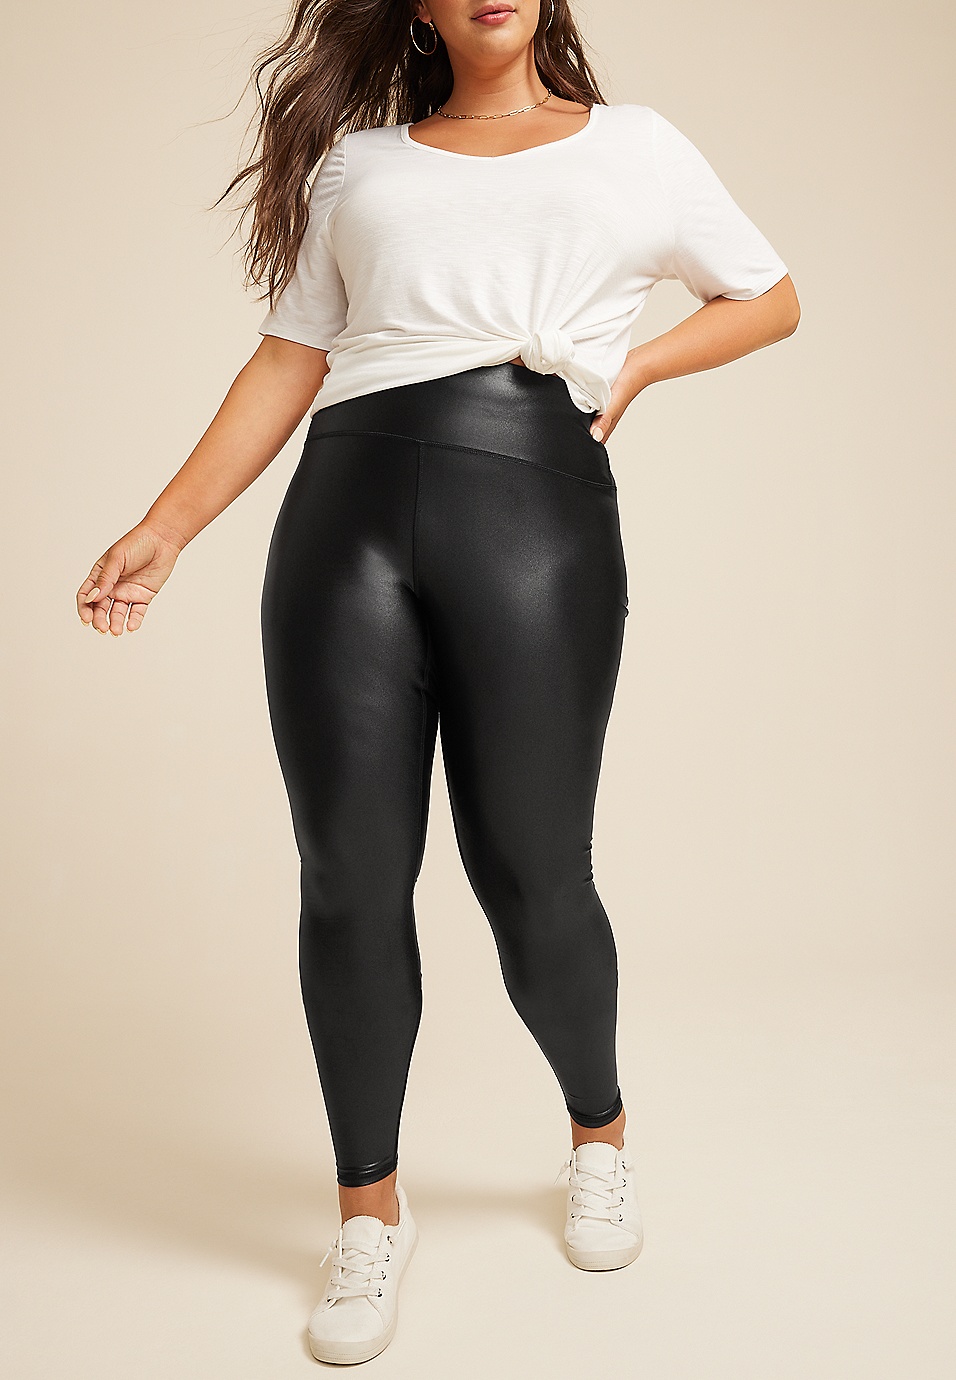   Essentials Women's Performance High-Rise Full-Length  Legging (Available in Plus Size), Black, X-Large : Clothing, Shoes & Jewelry